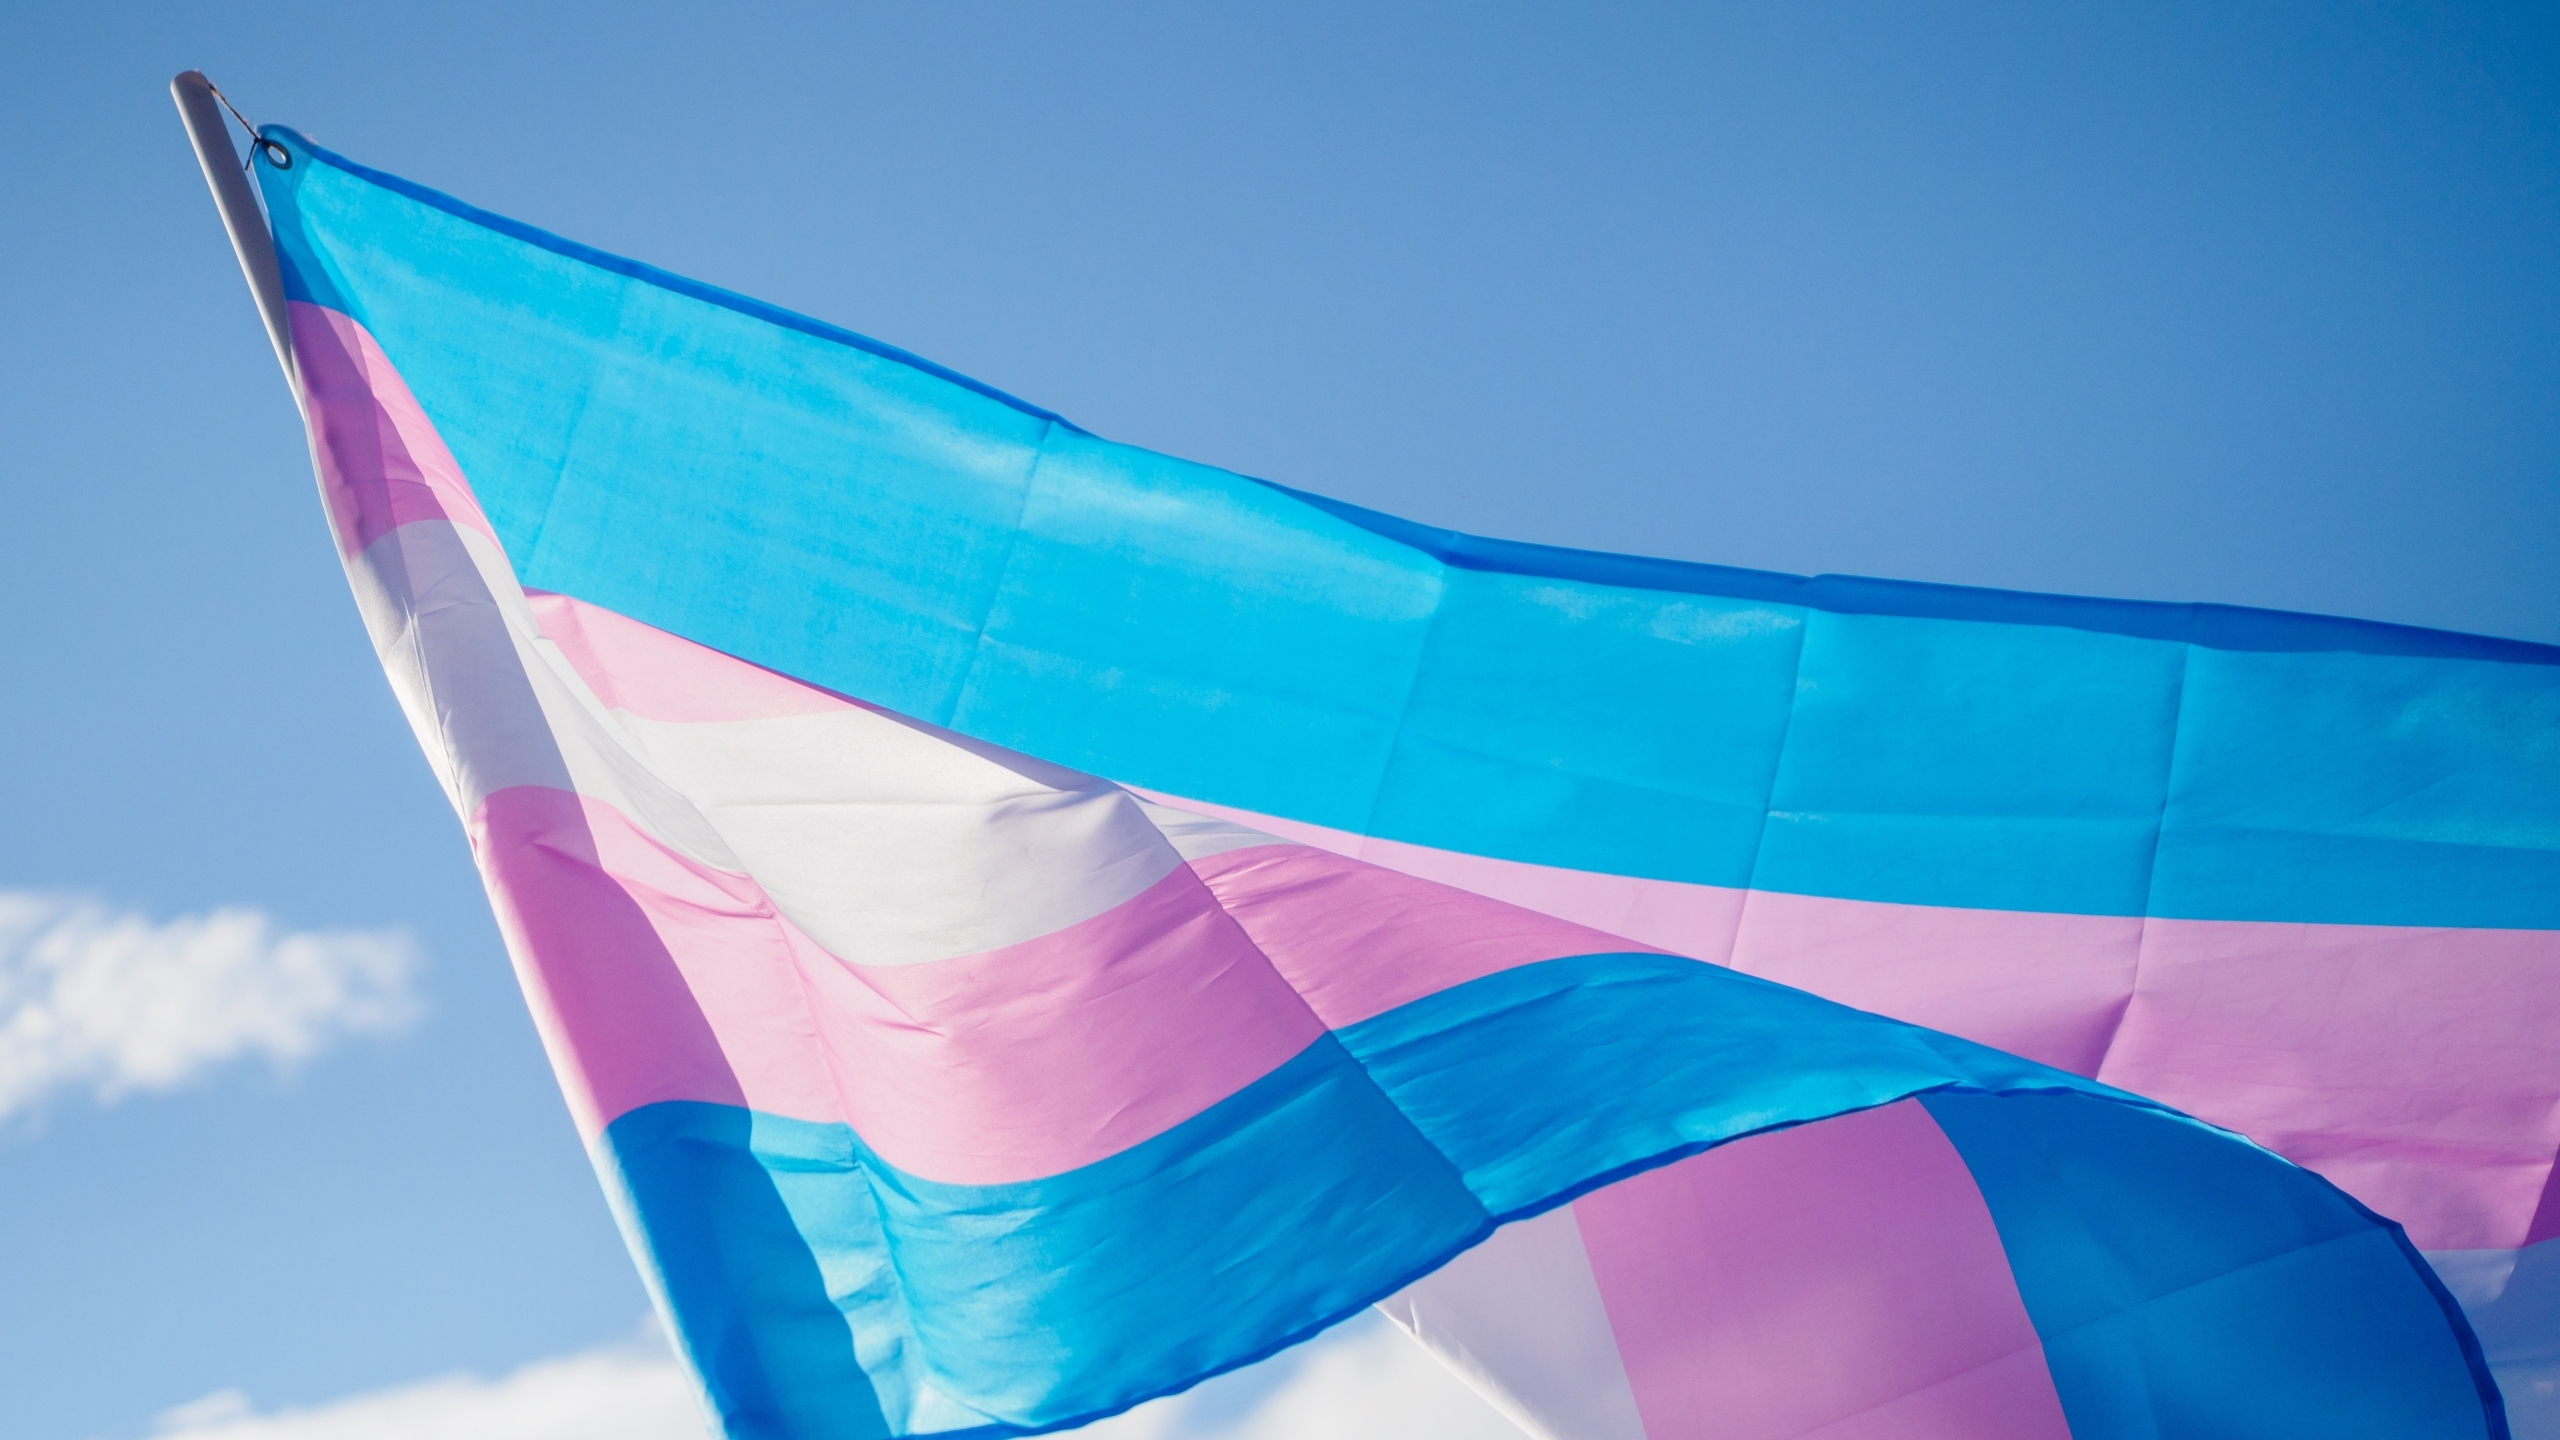 Alliance Defending Freedom's Crusade Against Trans Rights